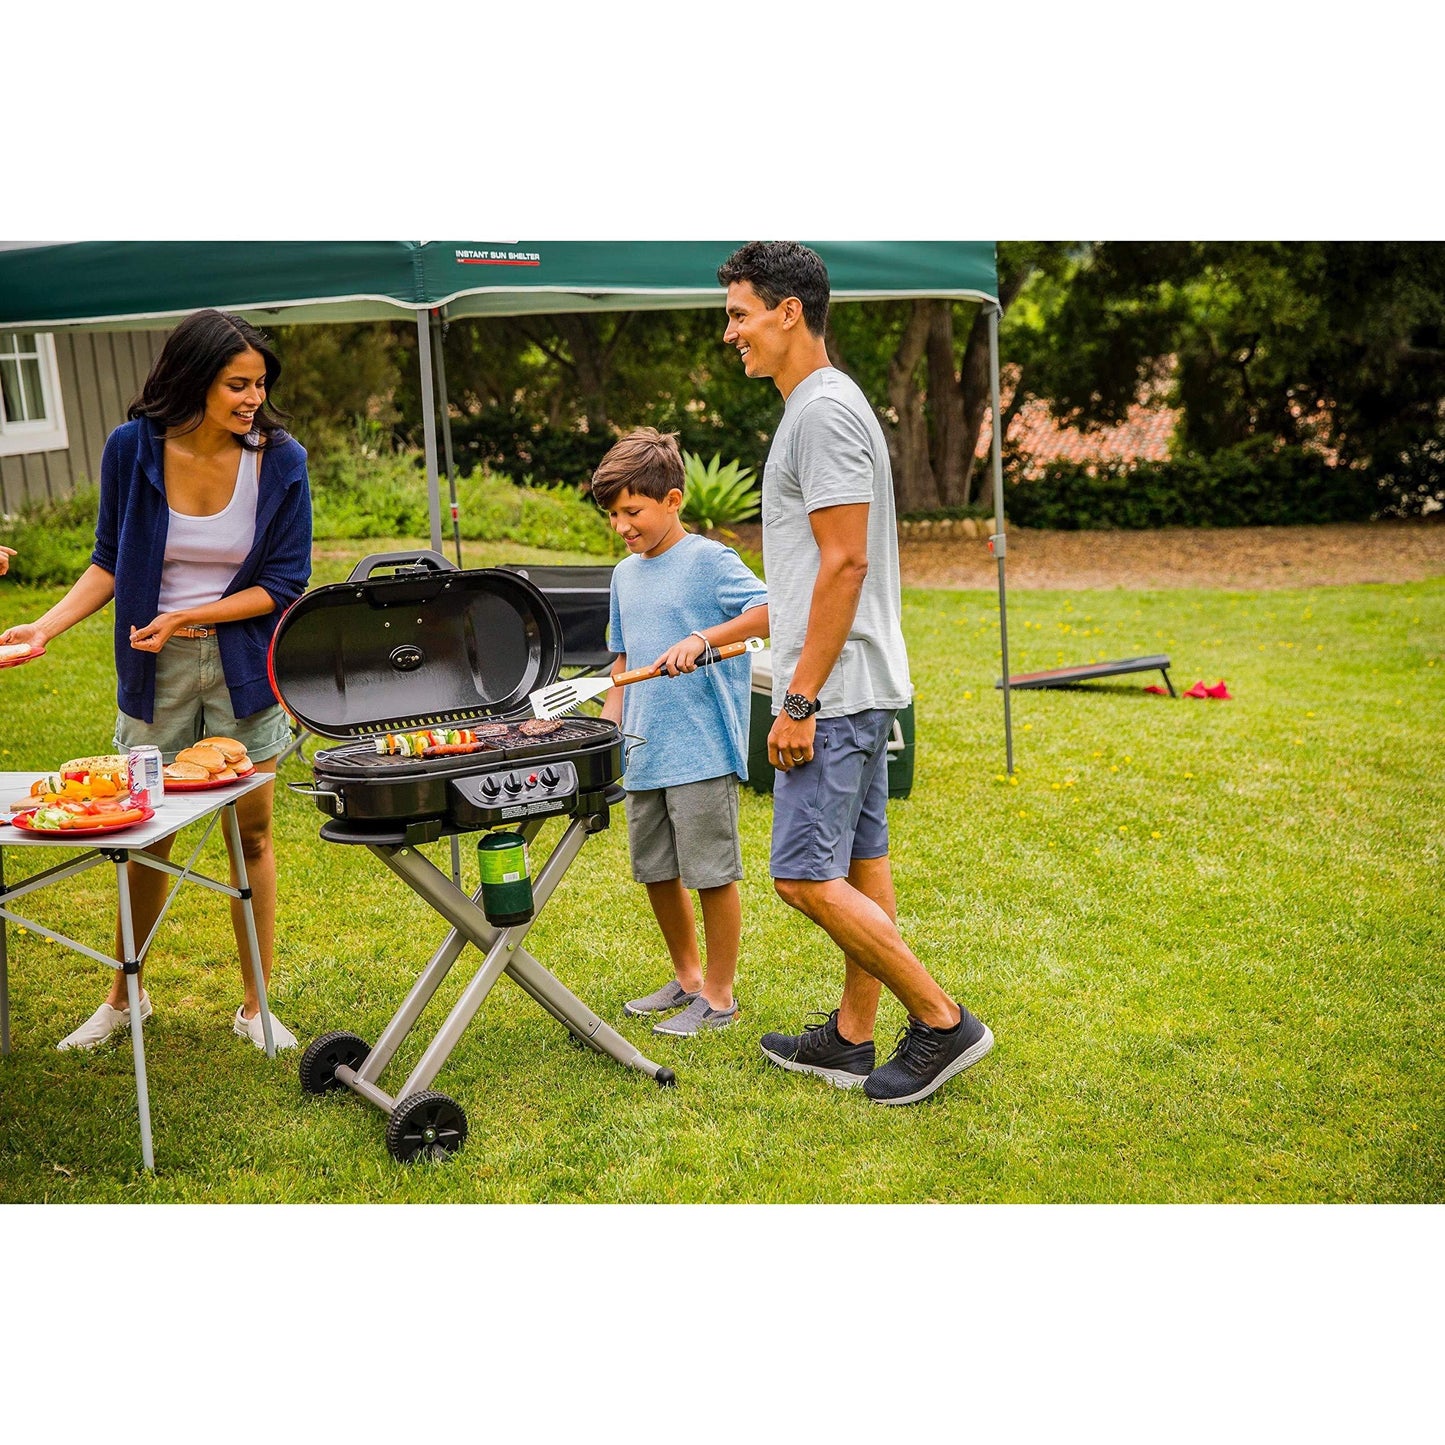 Coleman Roadtrip 285 Portable Stand-Up Propane Grill, Gas Grill with 3 Adjustable Burners & Instastart Push-Button Ignition; Great for Camping, Tailgating, BBQ, Parties, Backyard, Patio & More - CookCave